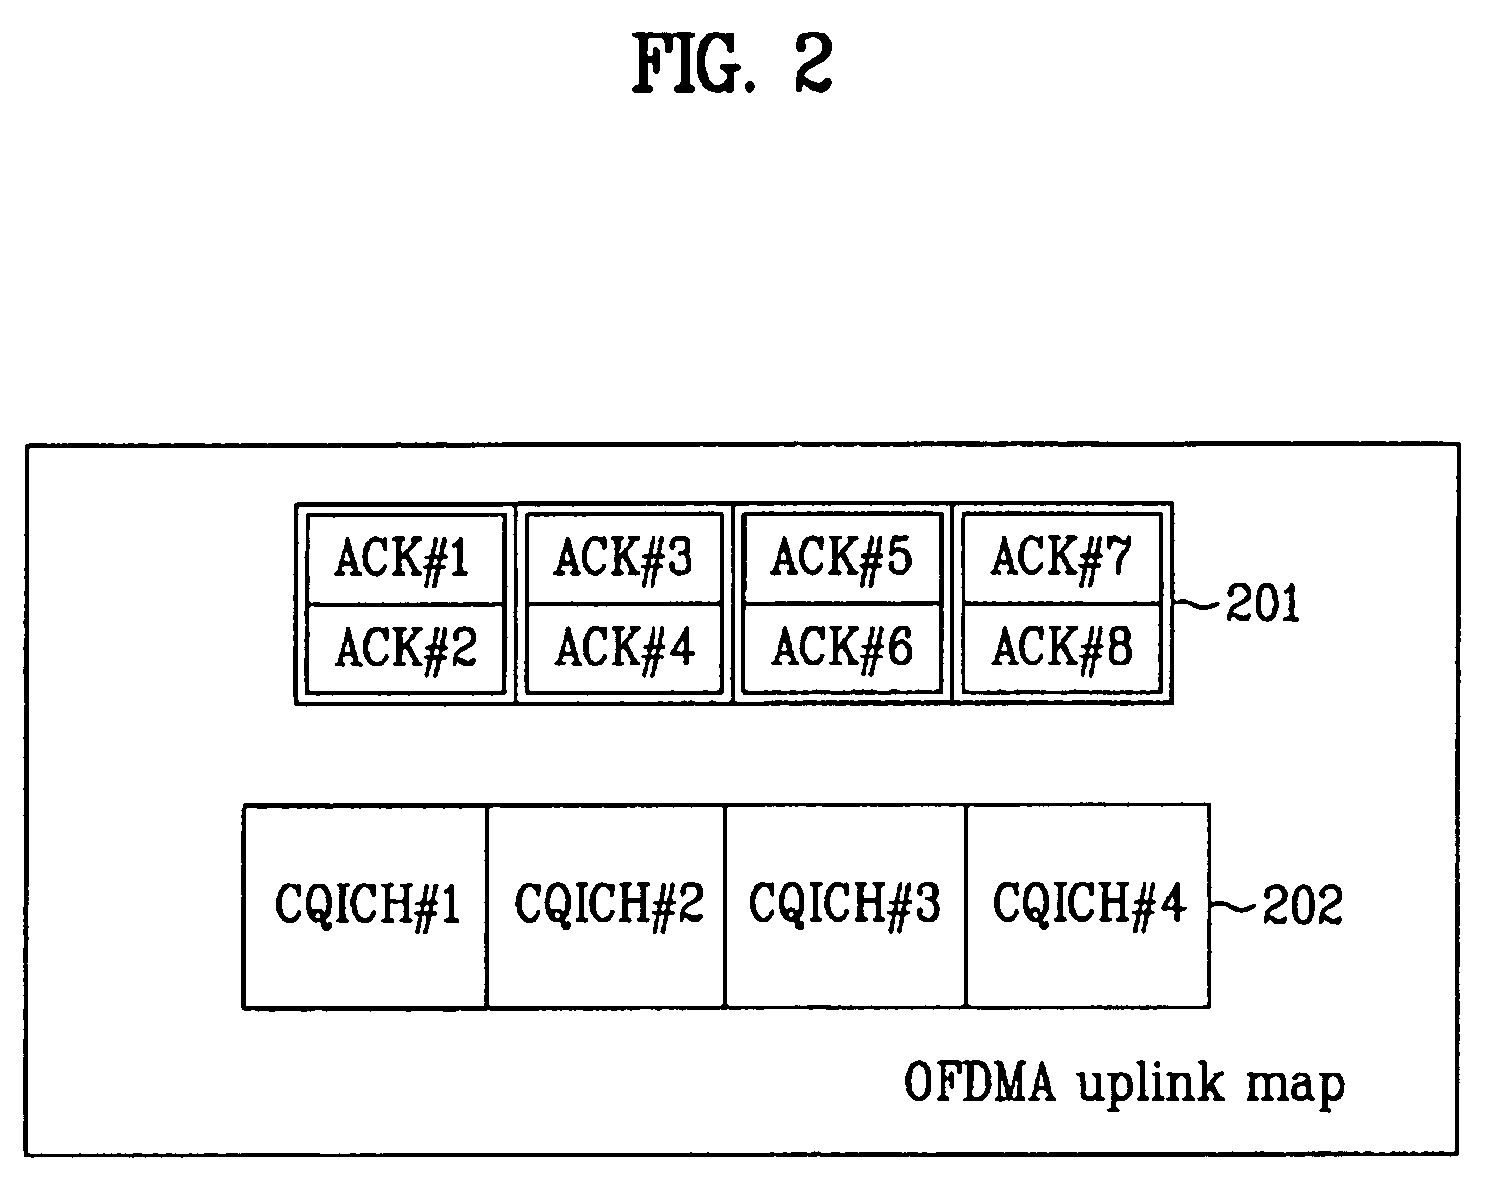 Communicating non-coherent detectable signal in broadband wireless access system